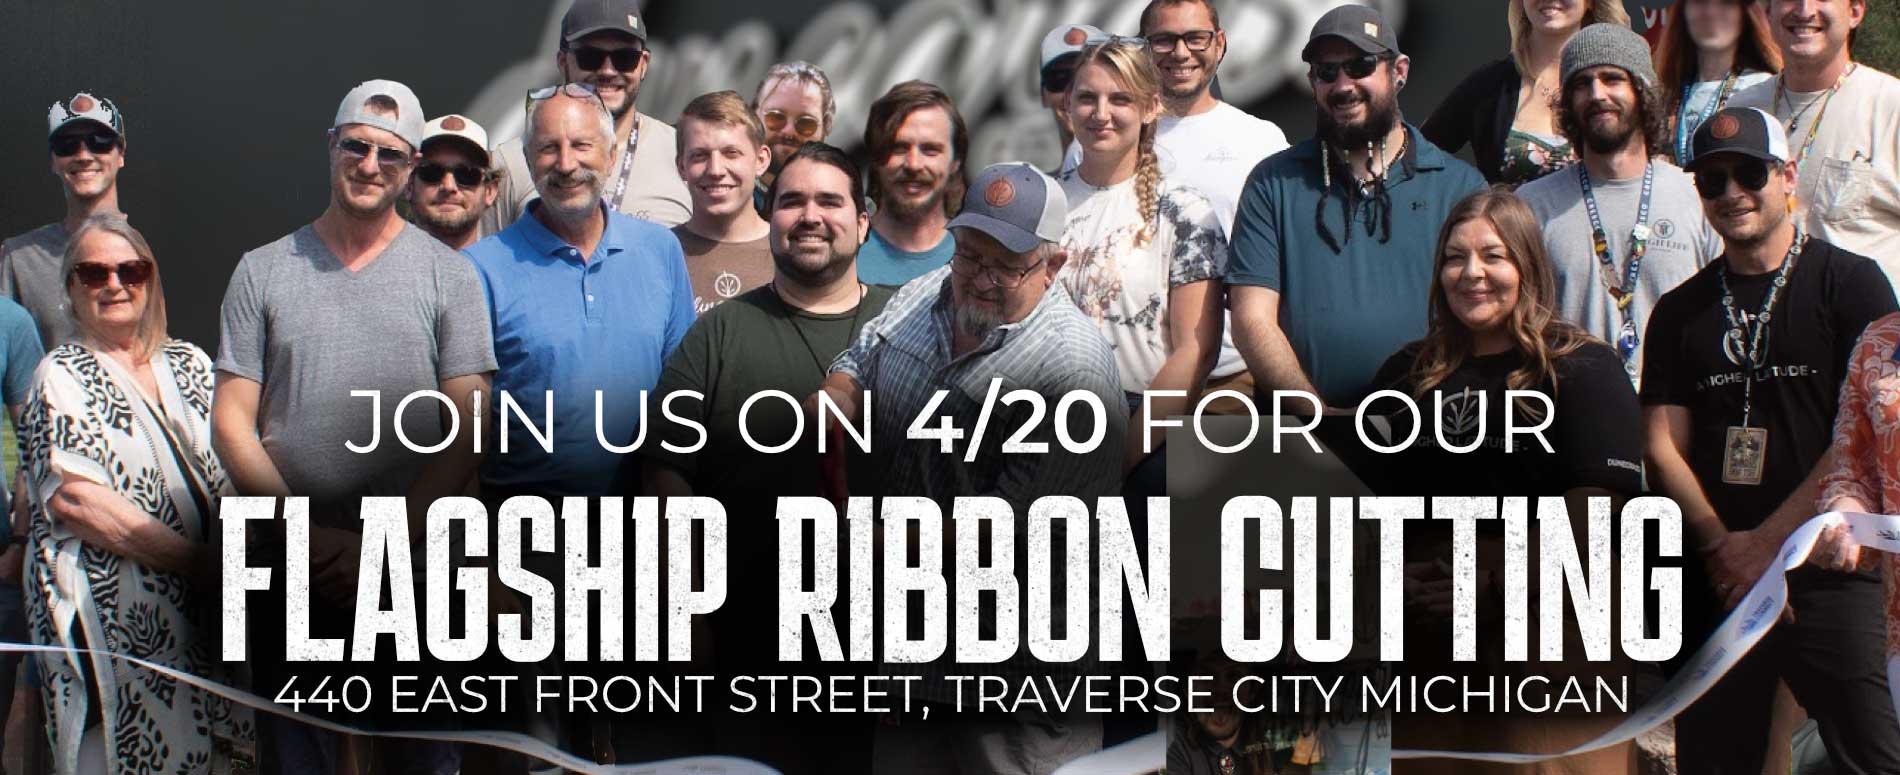 Join us on 4/20 for our Flagship Ribbon Cutting at 440 East Front Street, Traverse City Michigan